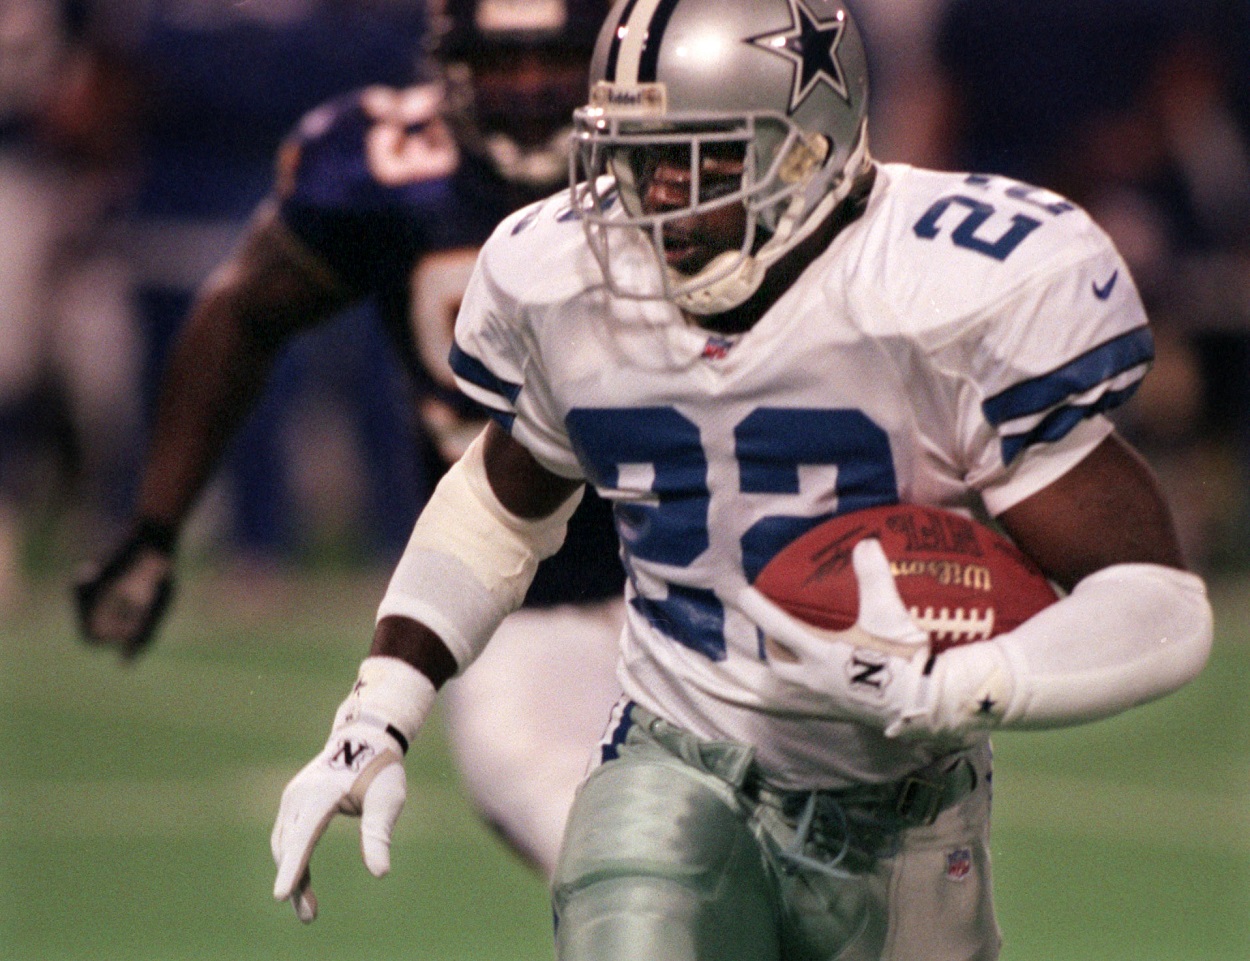 Emmitt Smith during an NFL matchup between the Cowboys and Vikings